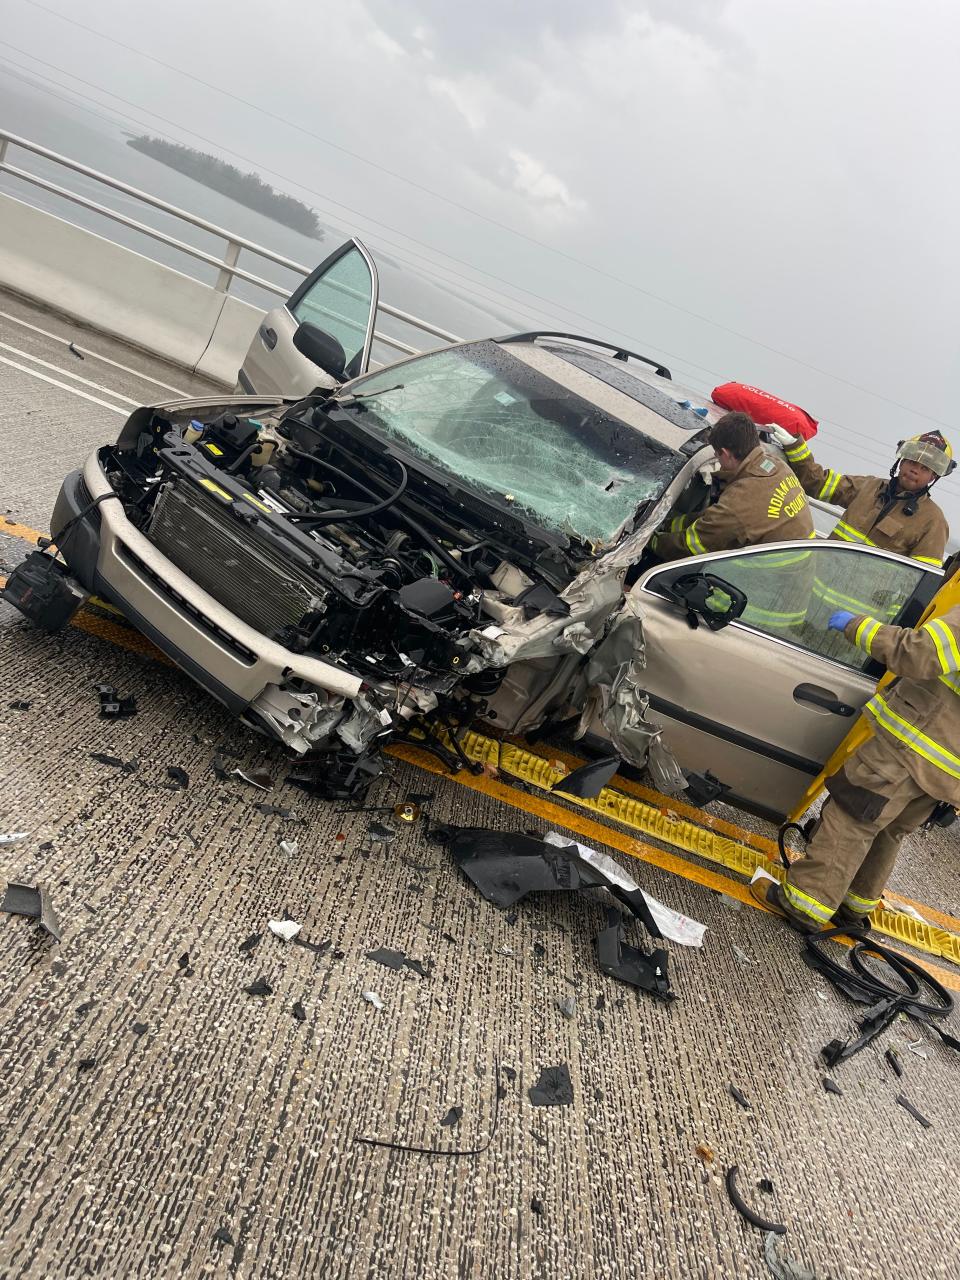 The driver of a gold Volvo sport utility vehicle was taken to HCA Florida Lawnwood Hospital by Indian River County Fire Rescue crews after a head-on collision on the Alma Lee Loy Bridge Wednesday, fire and police officials said.